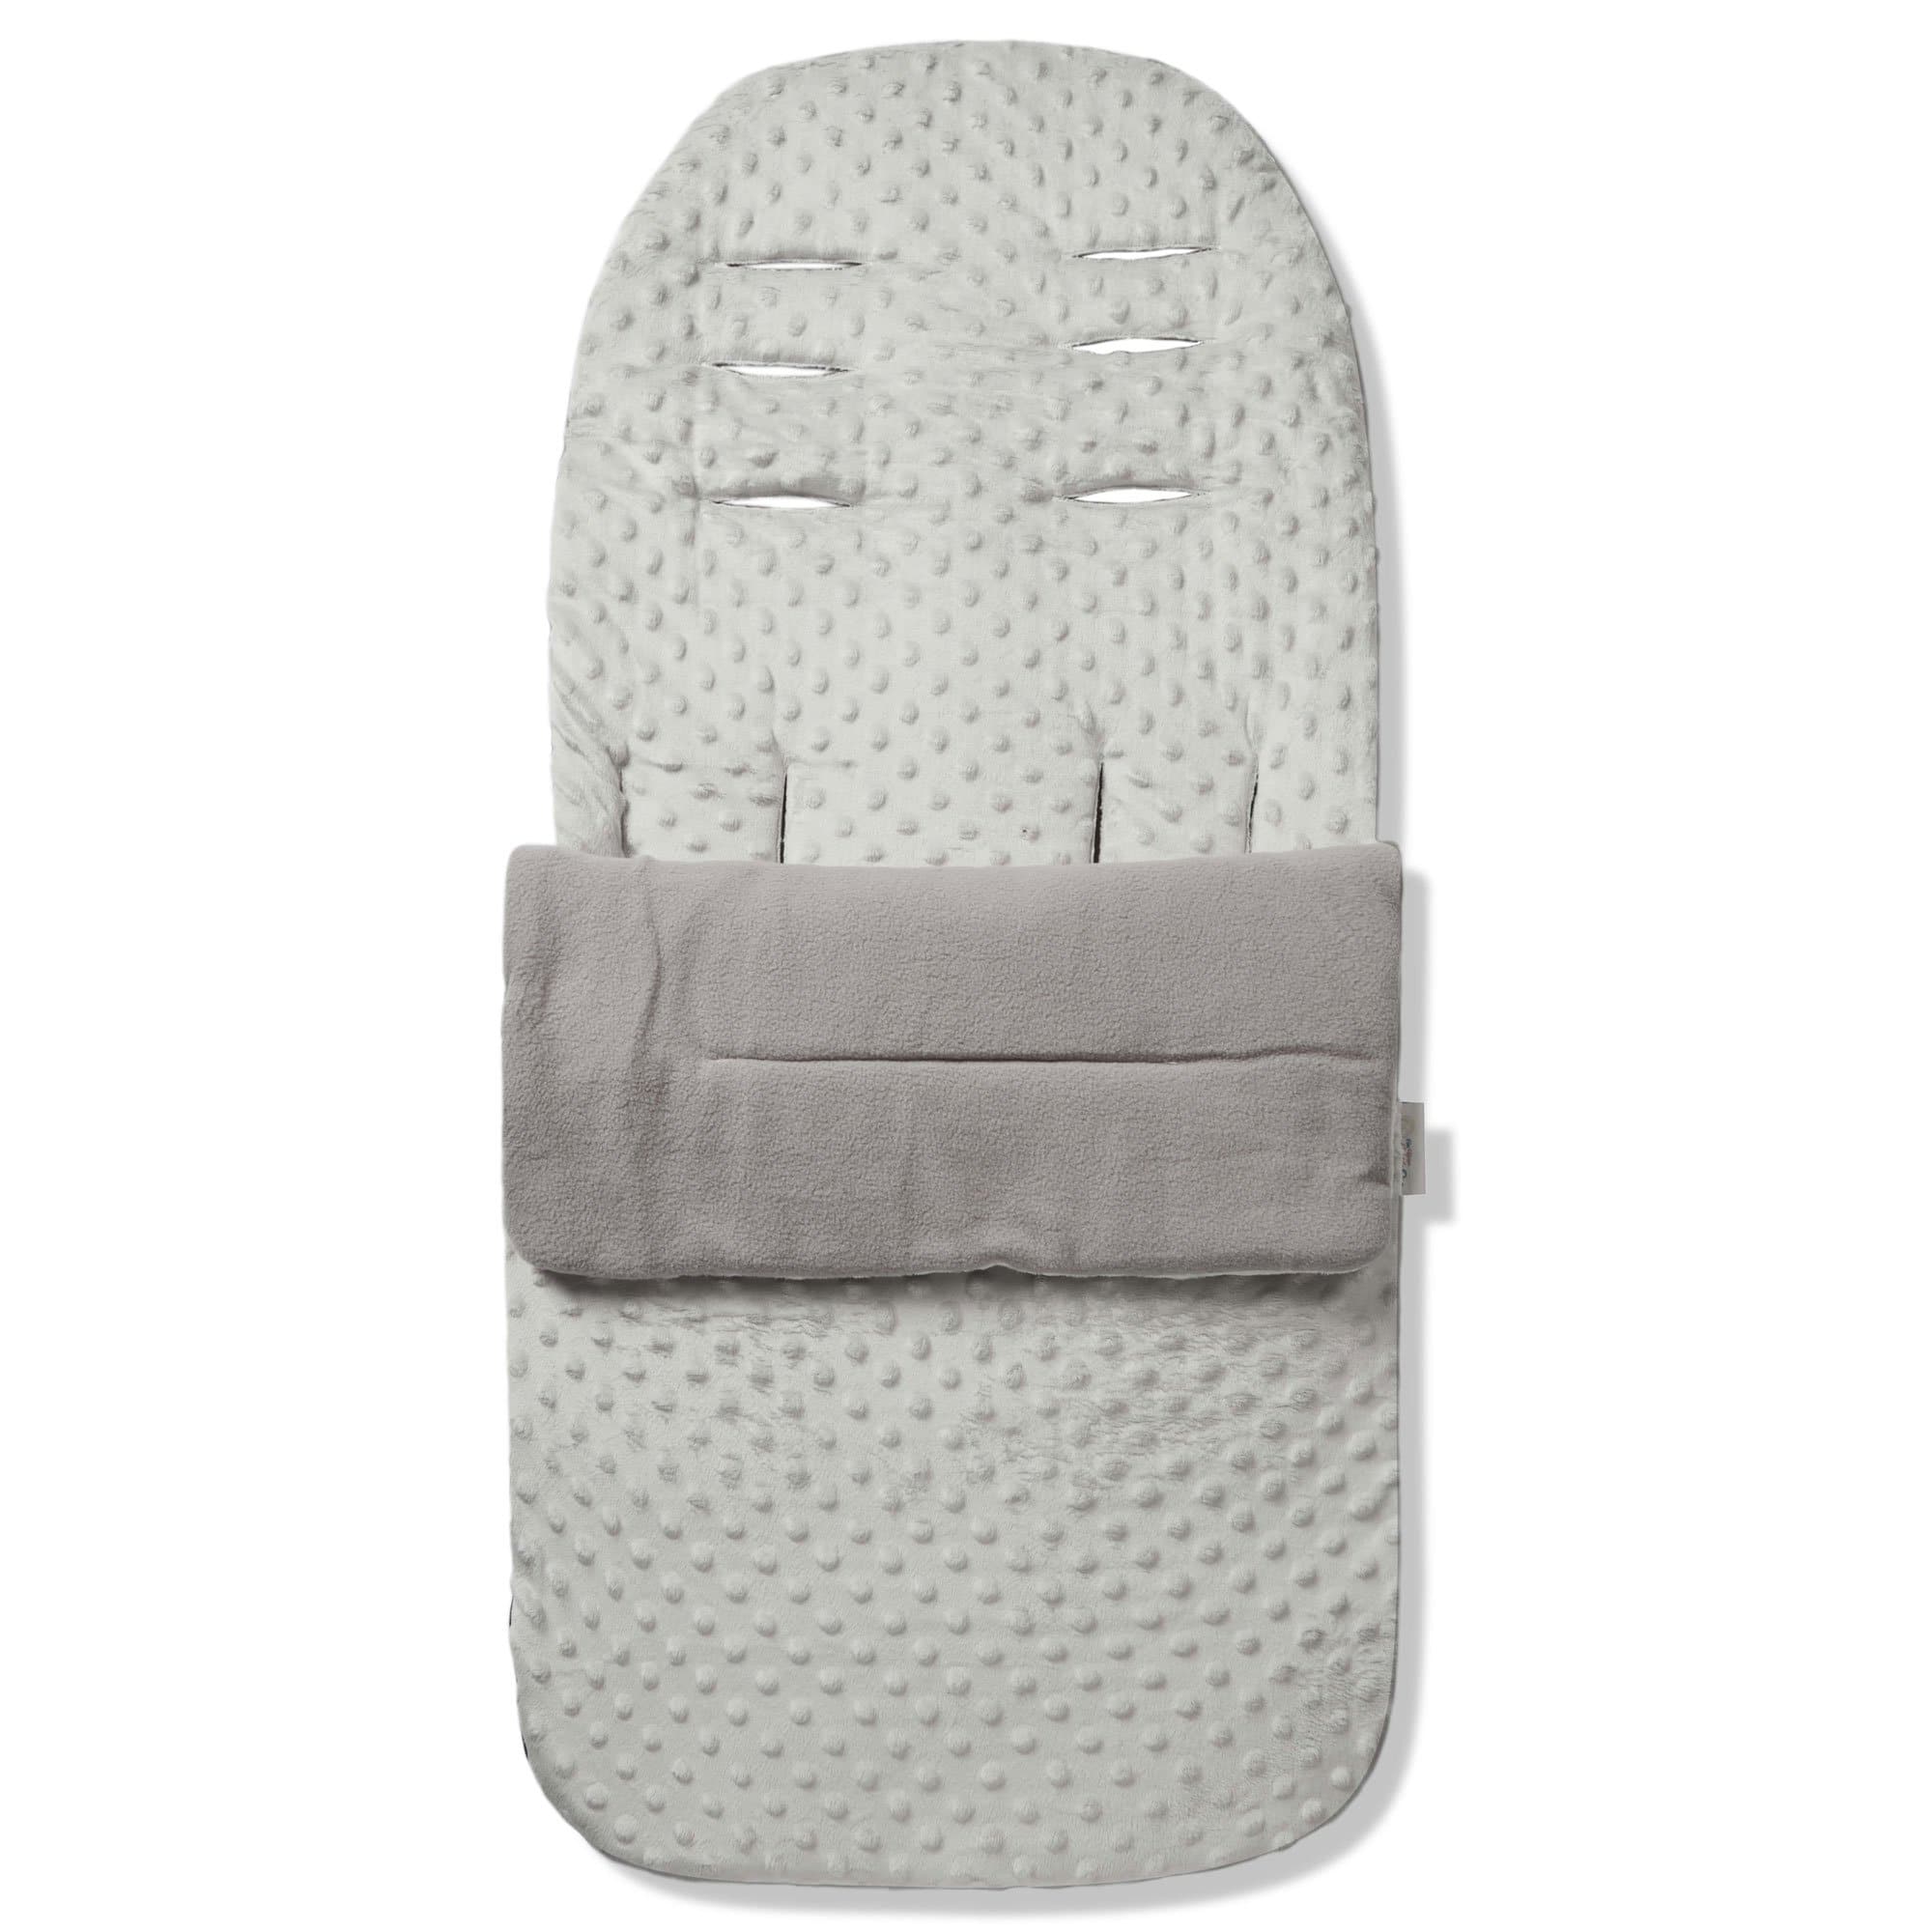 Dimple Footmuff / Cosy Toes Compatible with Esprit - For Your Little One